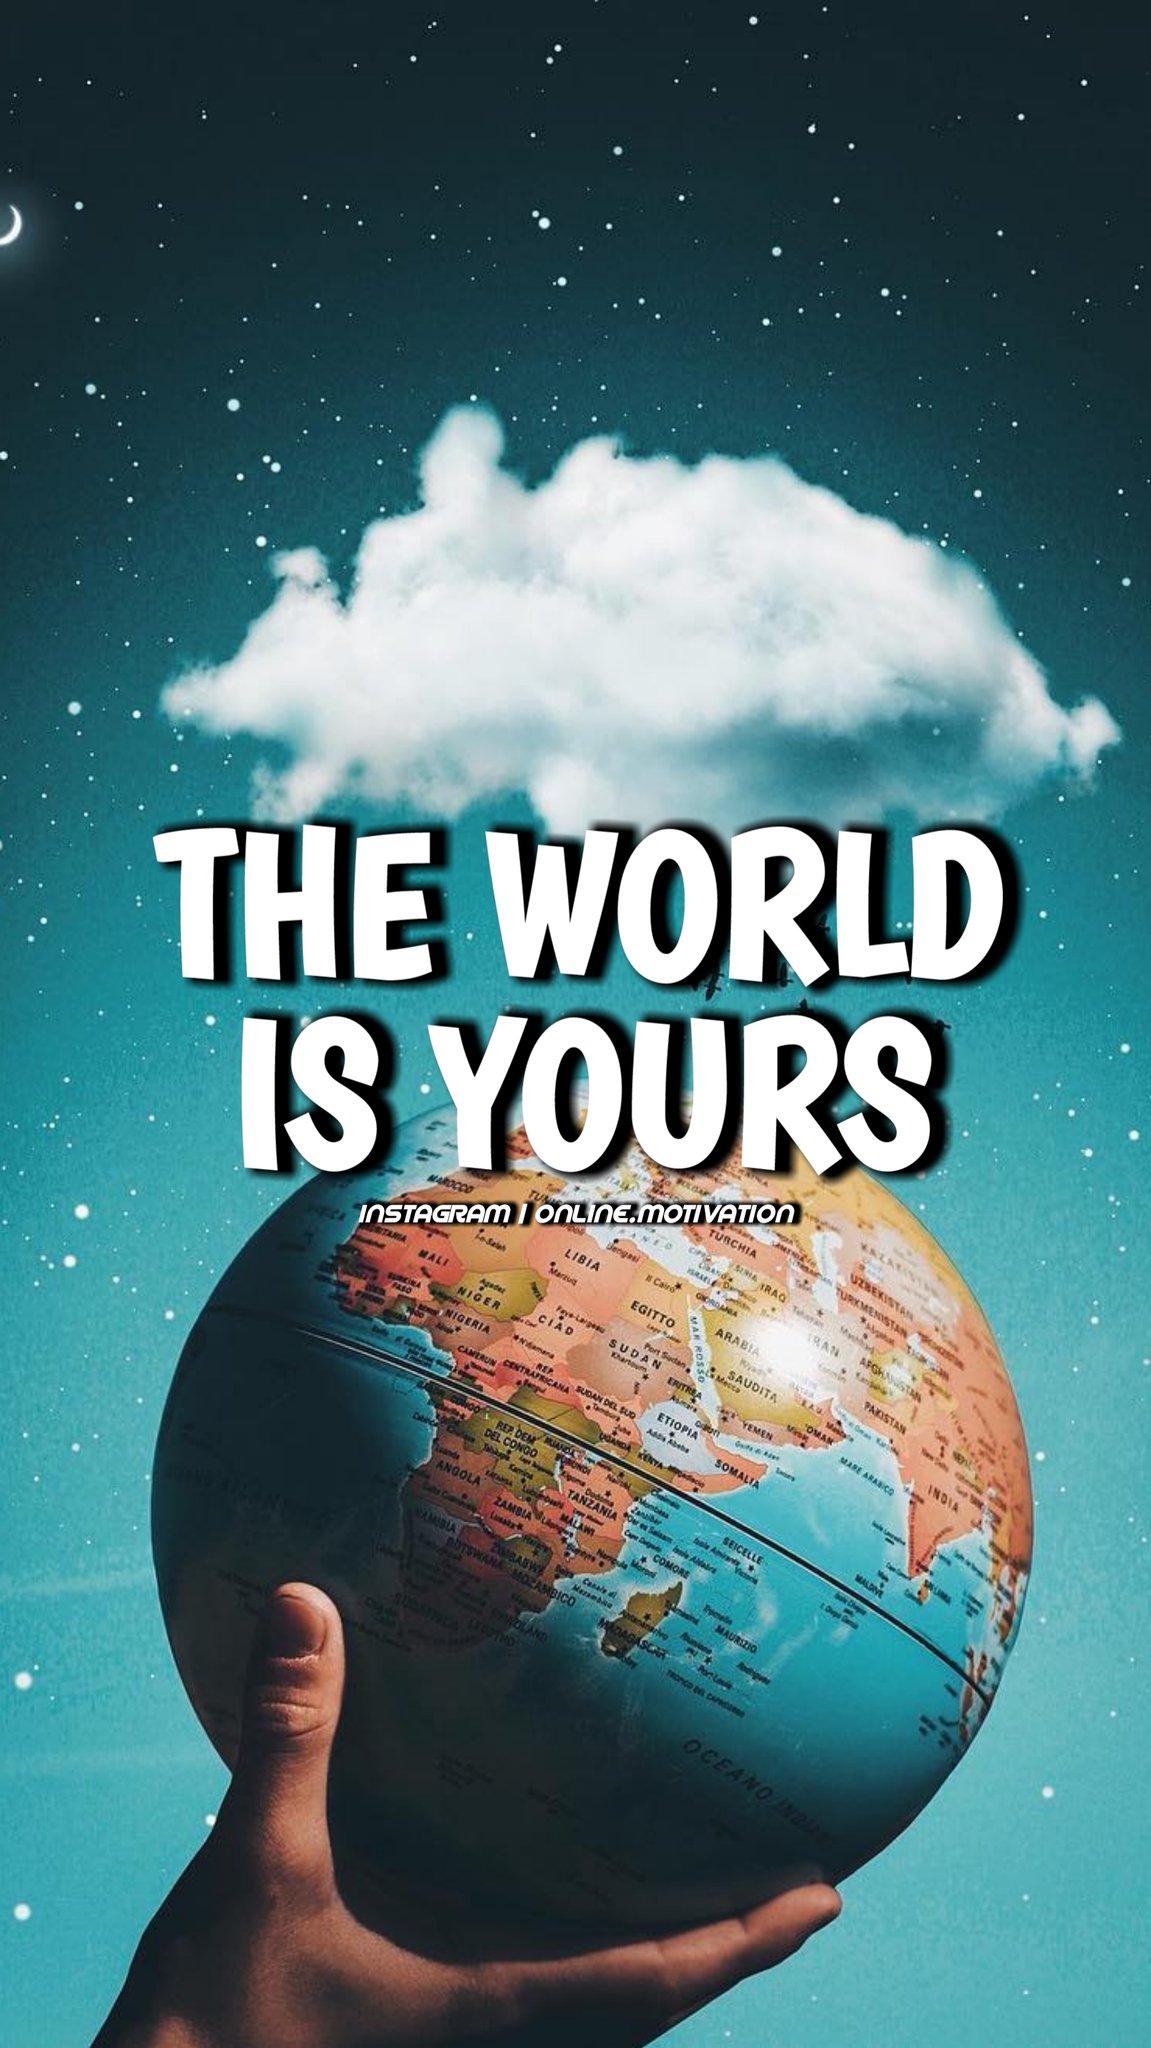 The World is Yours — Scarface :: Behance